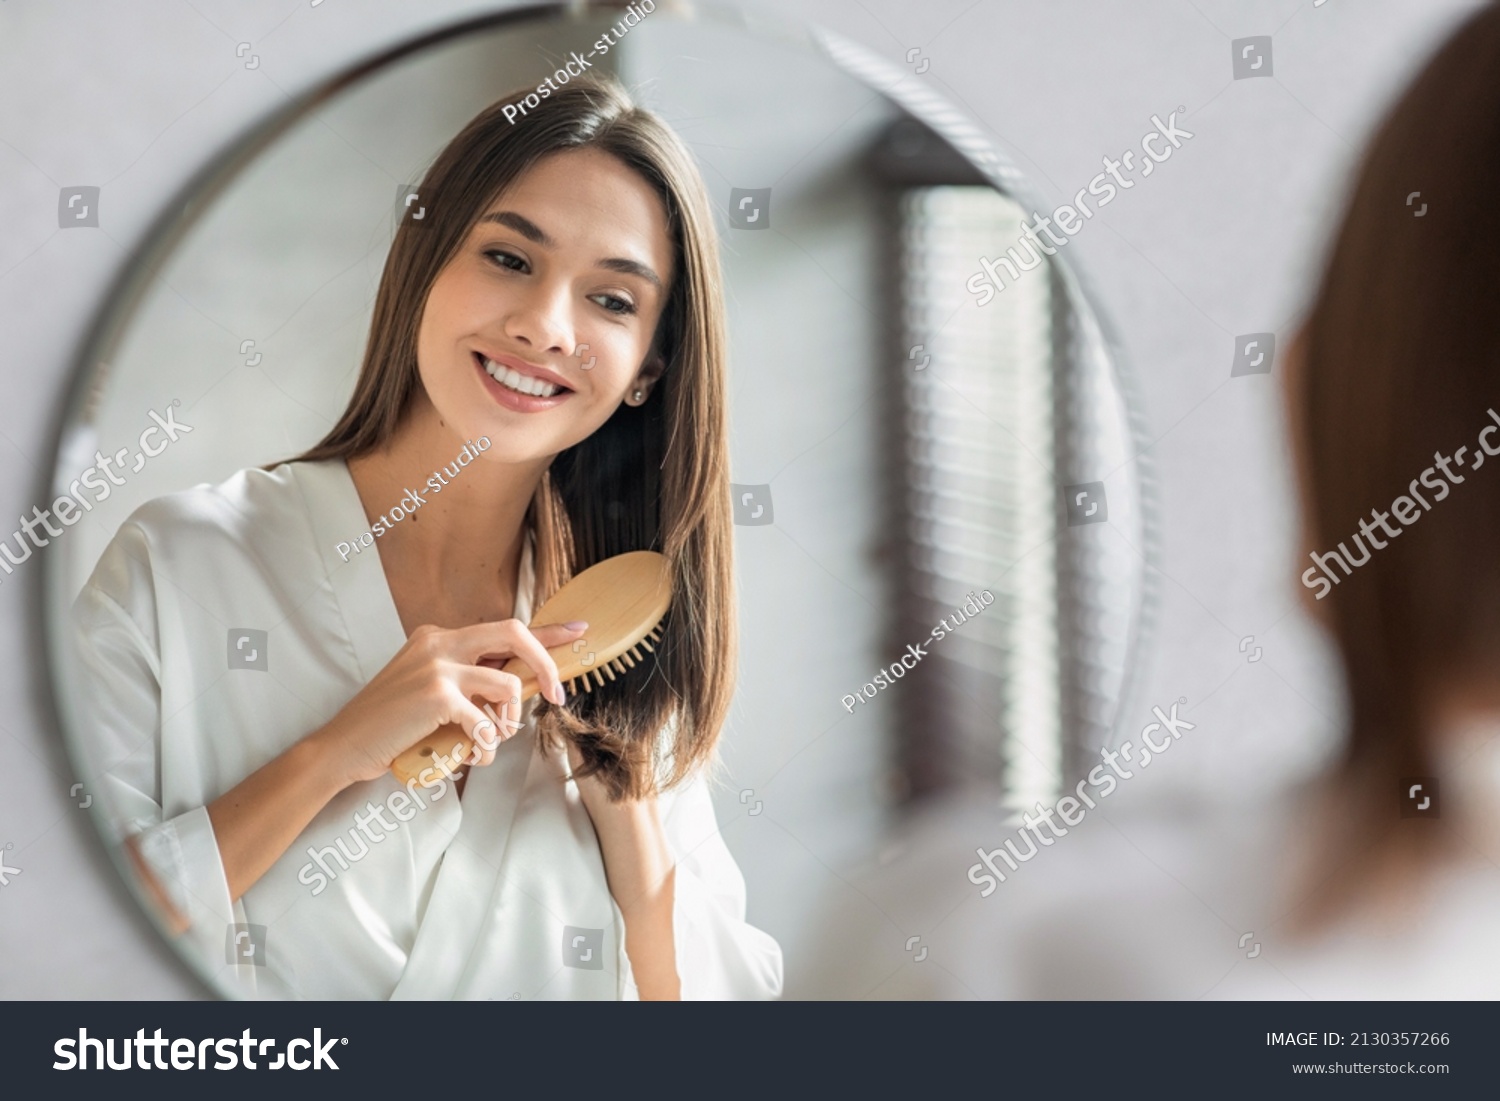 Beauty Routine. Pretty Woman Combing Her Beautiful Hair With Brush While Standing Near Mirror In Bathroom, Attractive Young Lady Looking To Her Reflection And Smiling, Selective Focus With Free Space #2130357266